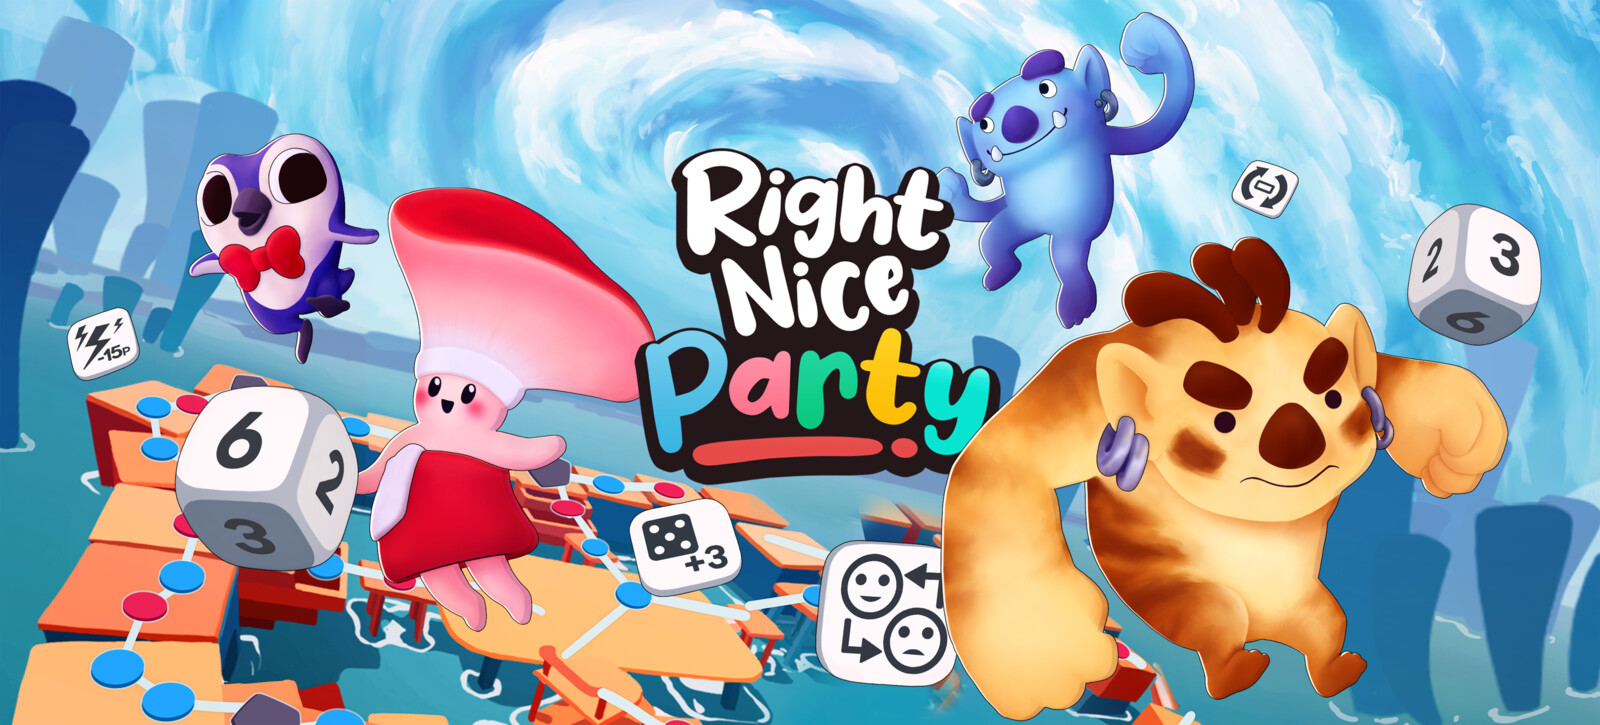 Right Nice Games - Right Nice Party